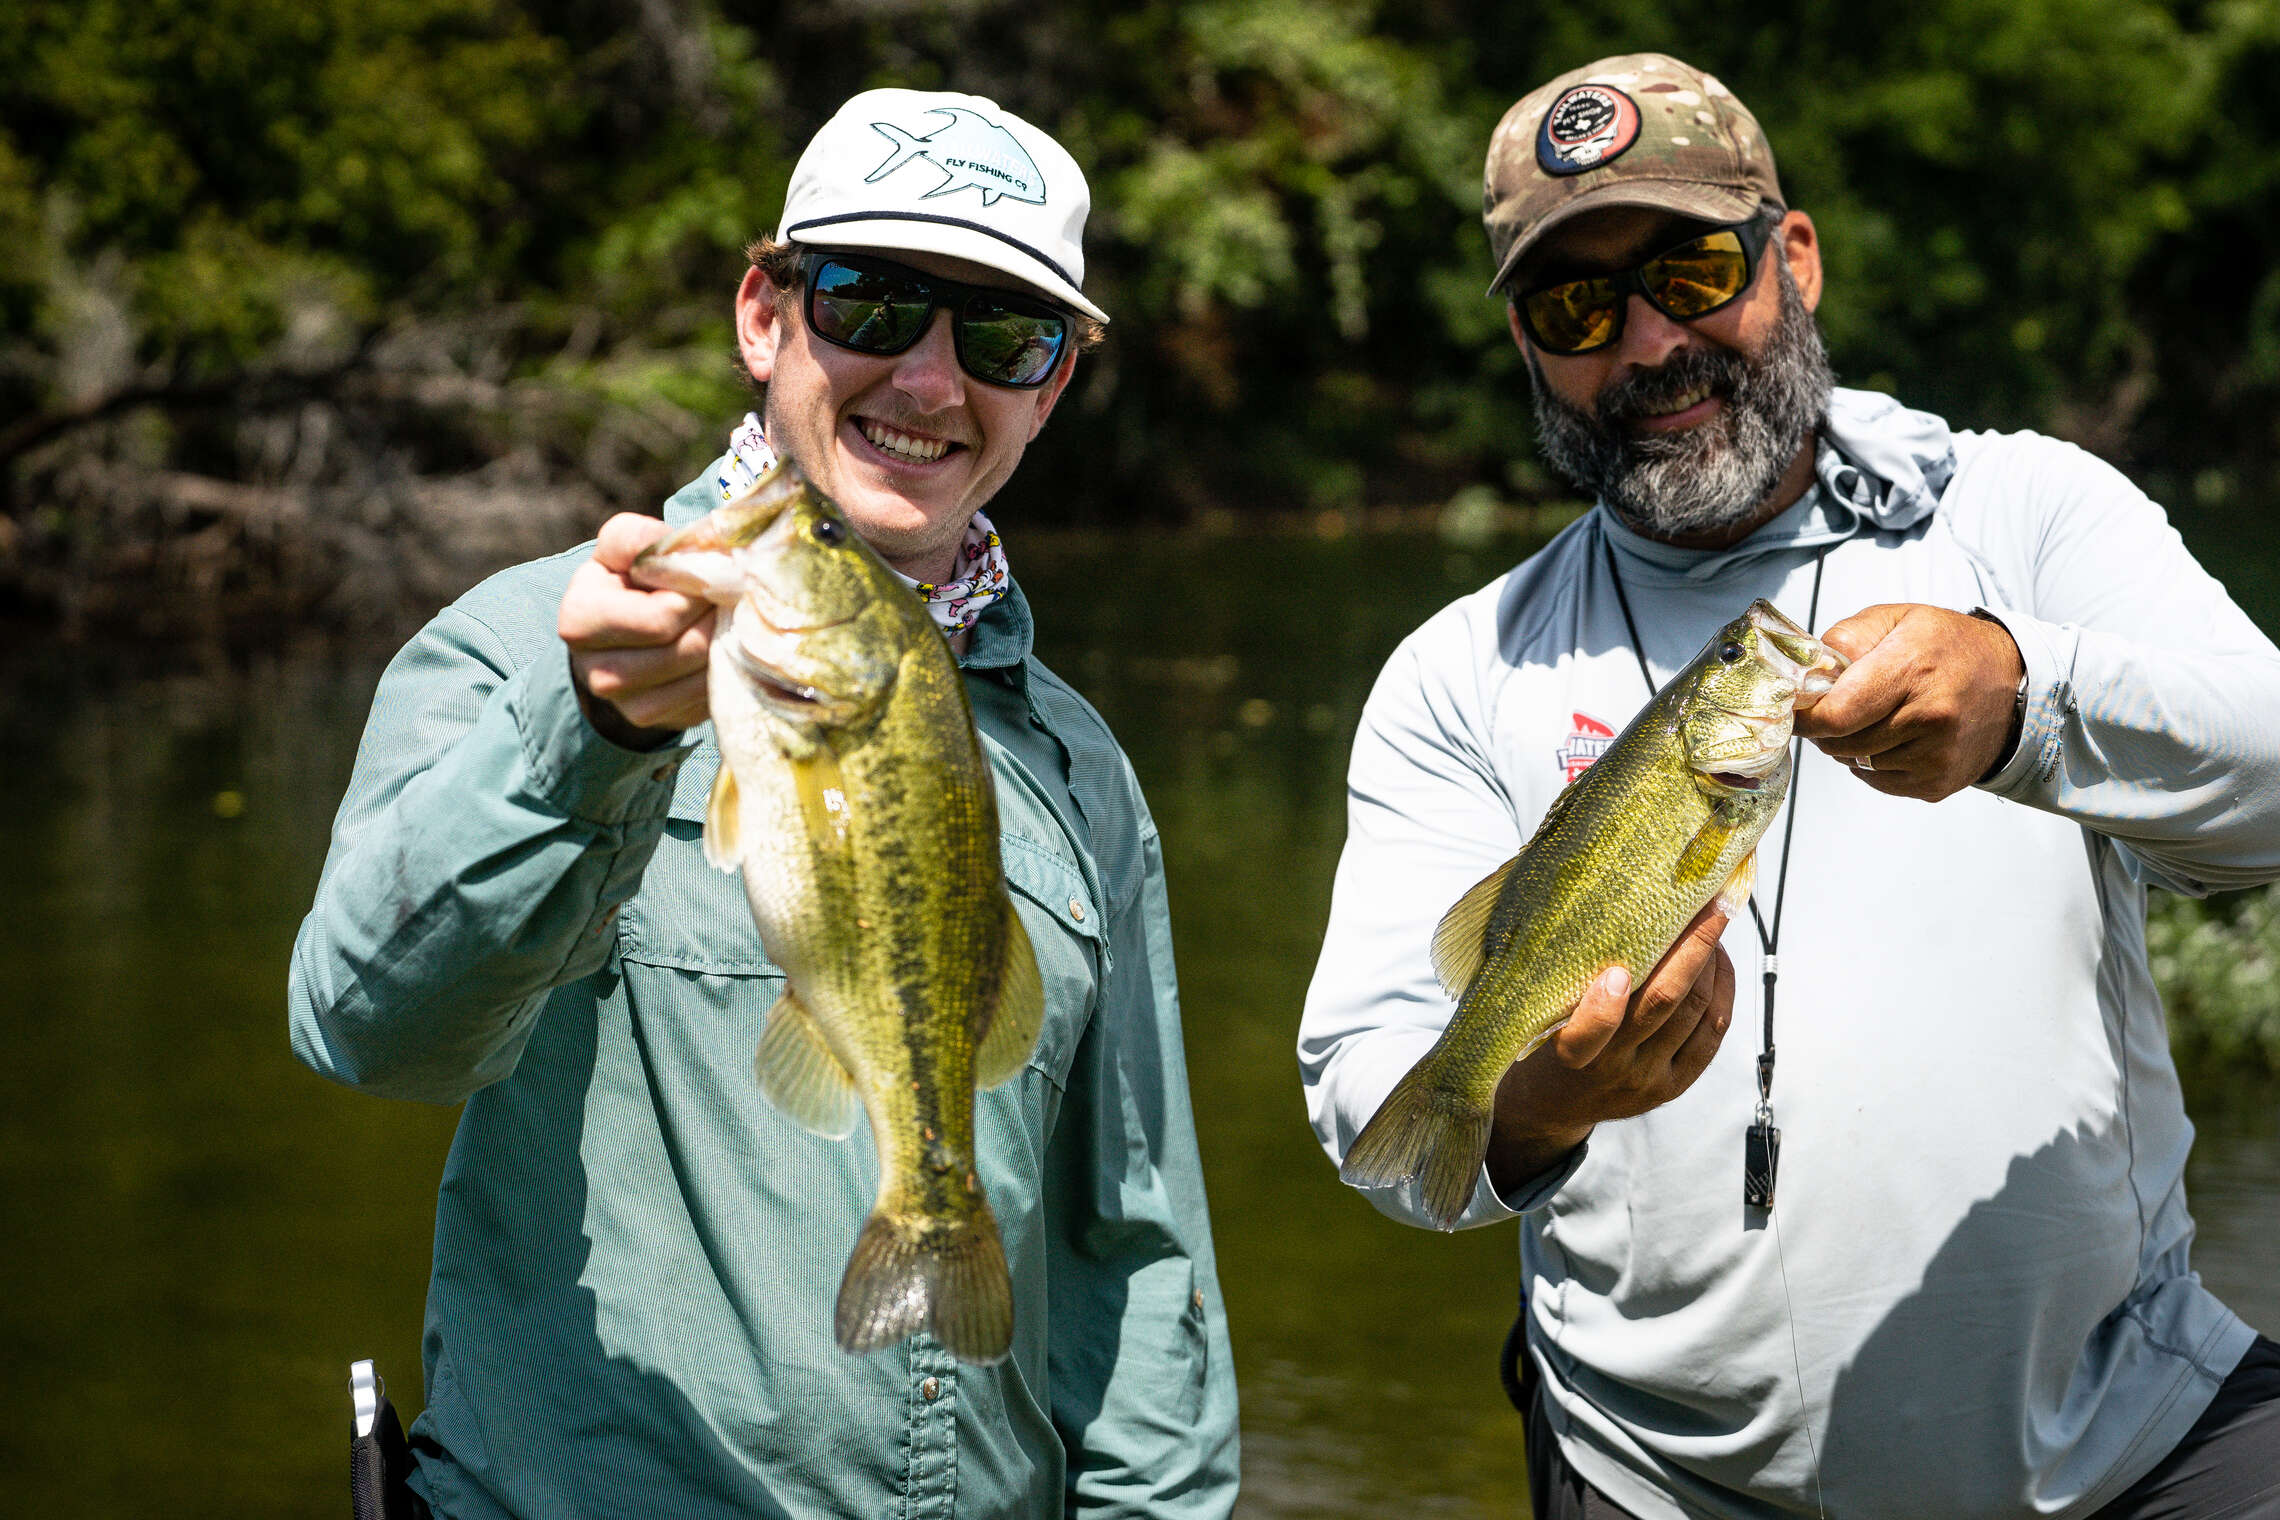 Tailwaters Fly Fishing - Texas' Fly Shop and Fly Fishing Travel Leader